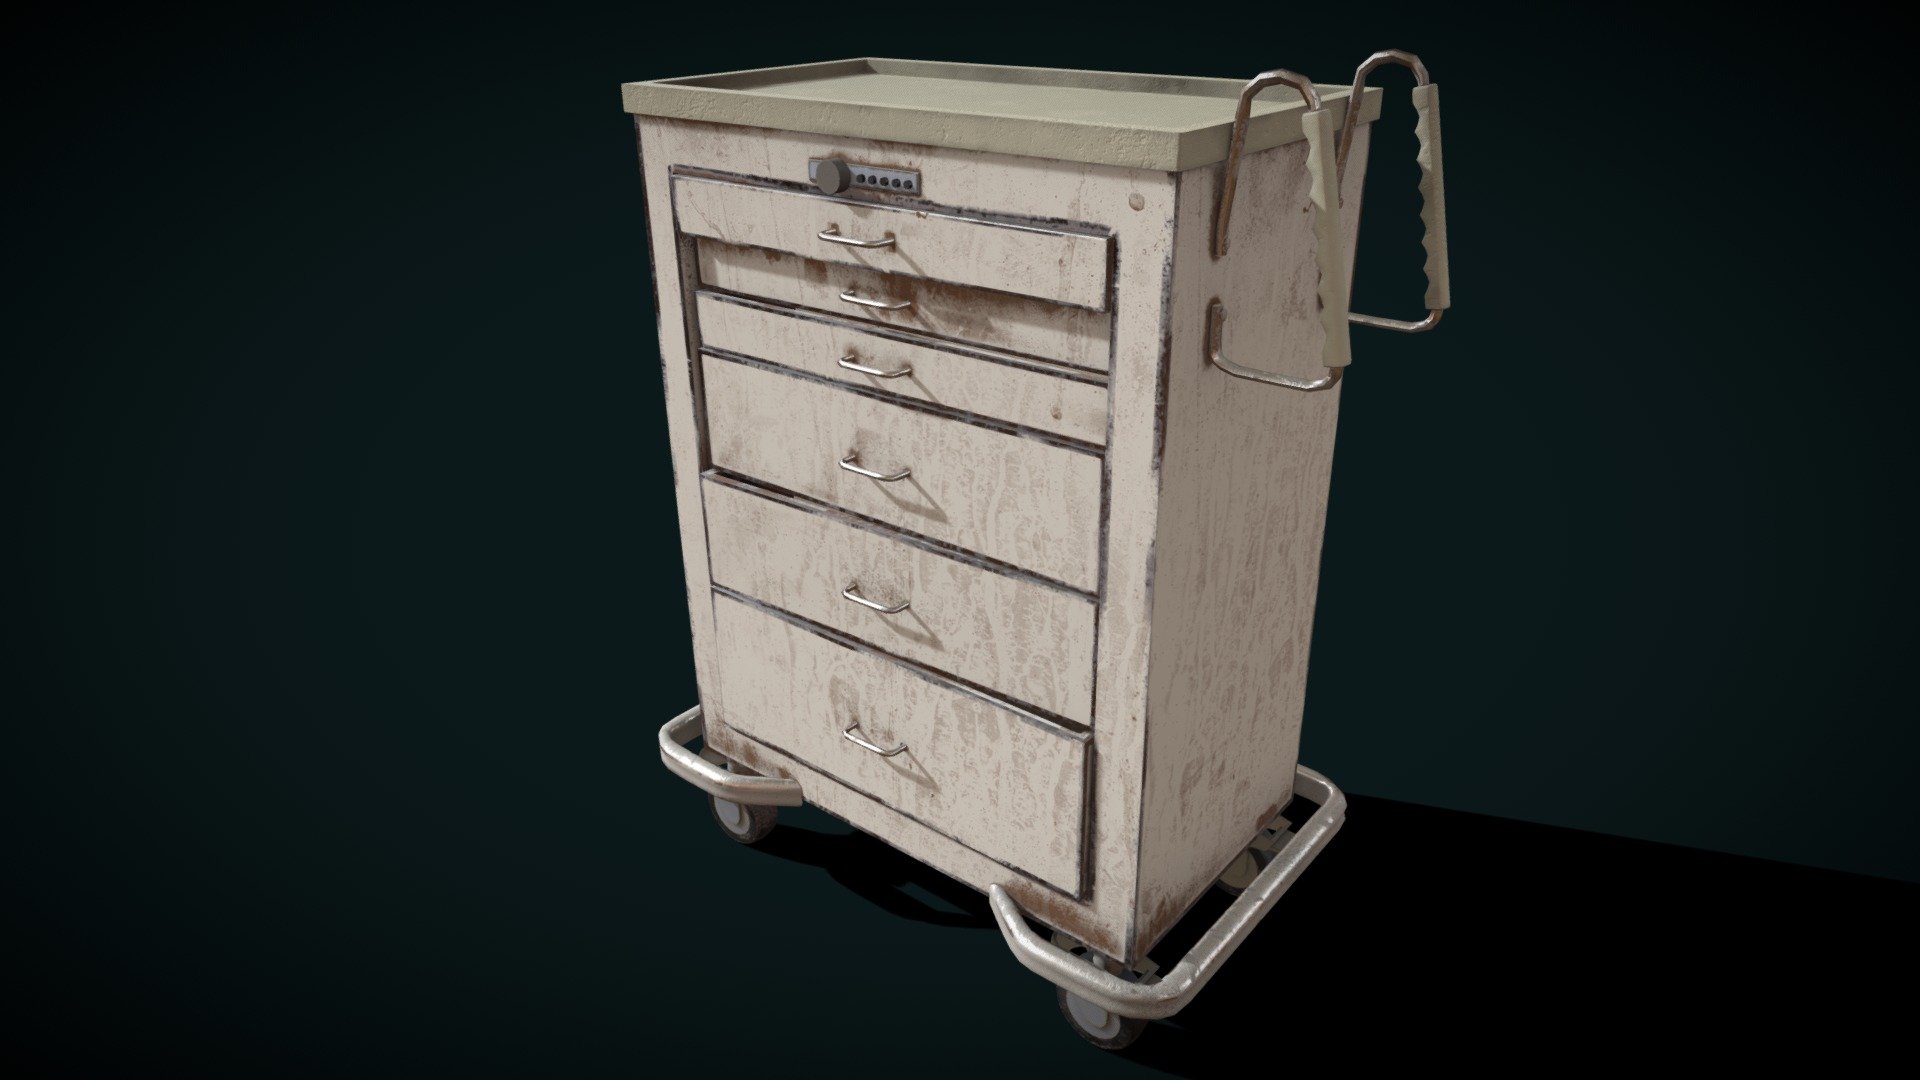 A rusty abandoned medical cart. 

Hello everybody! :) 
here's an asset I created that you may find useful. 
I used Maya for the modelling part and Substance Painter for the textures 3d model